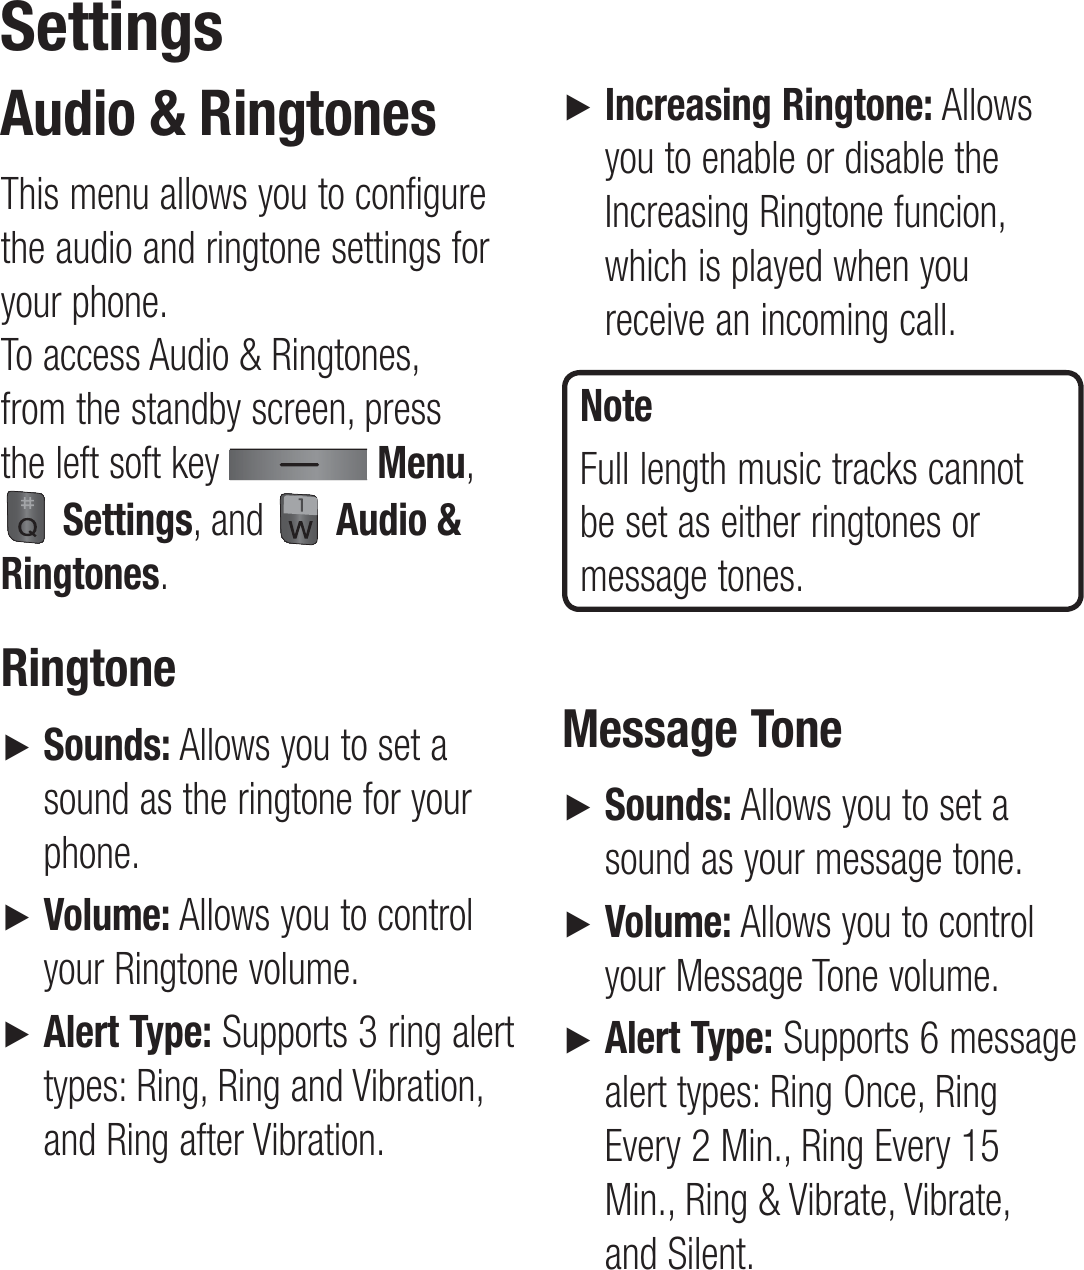 Audio &amp; RingtonesThis menu allows you to configure the audio and ringtone settings for your phone.  To access Audio &amp; Ringtones, from the standby screen, press the left soft key   Menu,  Settings, and   Audio &amp; Ringtones.Ringtone►   Sounds: Allows you to set a sound as the ringtone for your phone.►    Volume: Allows you to control your Ringtone volume.►   Alert Type: Supports 3 ring alert types: Ring, Ring and Vibration, and Ring after Vibration.►   Increasing Ringtone: Allows you to enable or disable the Increasing Ringtone funcion, which is played when you receive an incoming call.NoteFull length music tracks cannot be set as either ringtones or message tones.Message Tone►   Sounds: Allows you to set a sound as your message tone.►   Volume: Allows you to control your Message Tone volume.►   Alert Type: Supports 6 message alert types: Ring Once, Ring Every 2 Min., Ring Every 15 Min., Ring &amp; Vibrate, Vibrate, and Silent.Settings